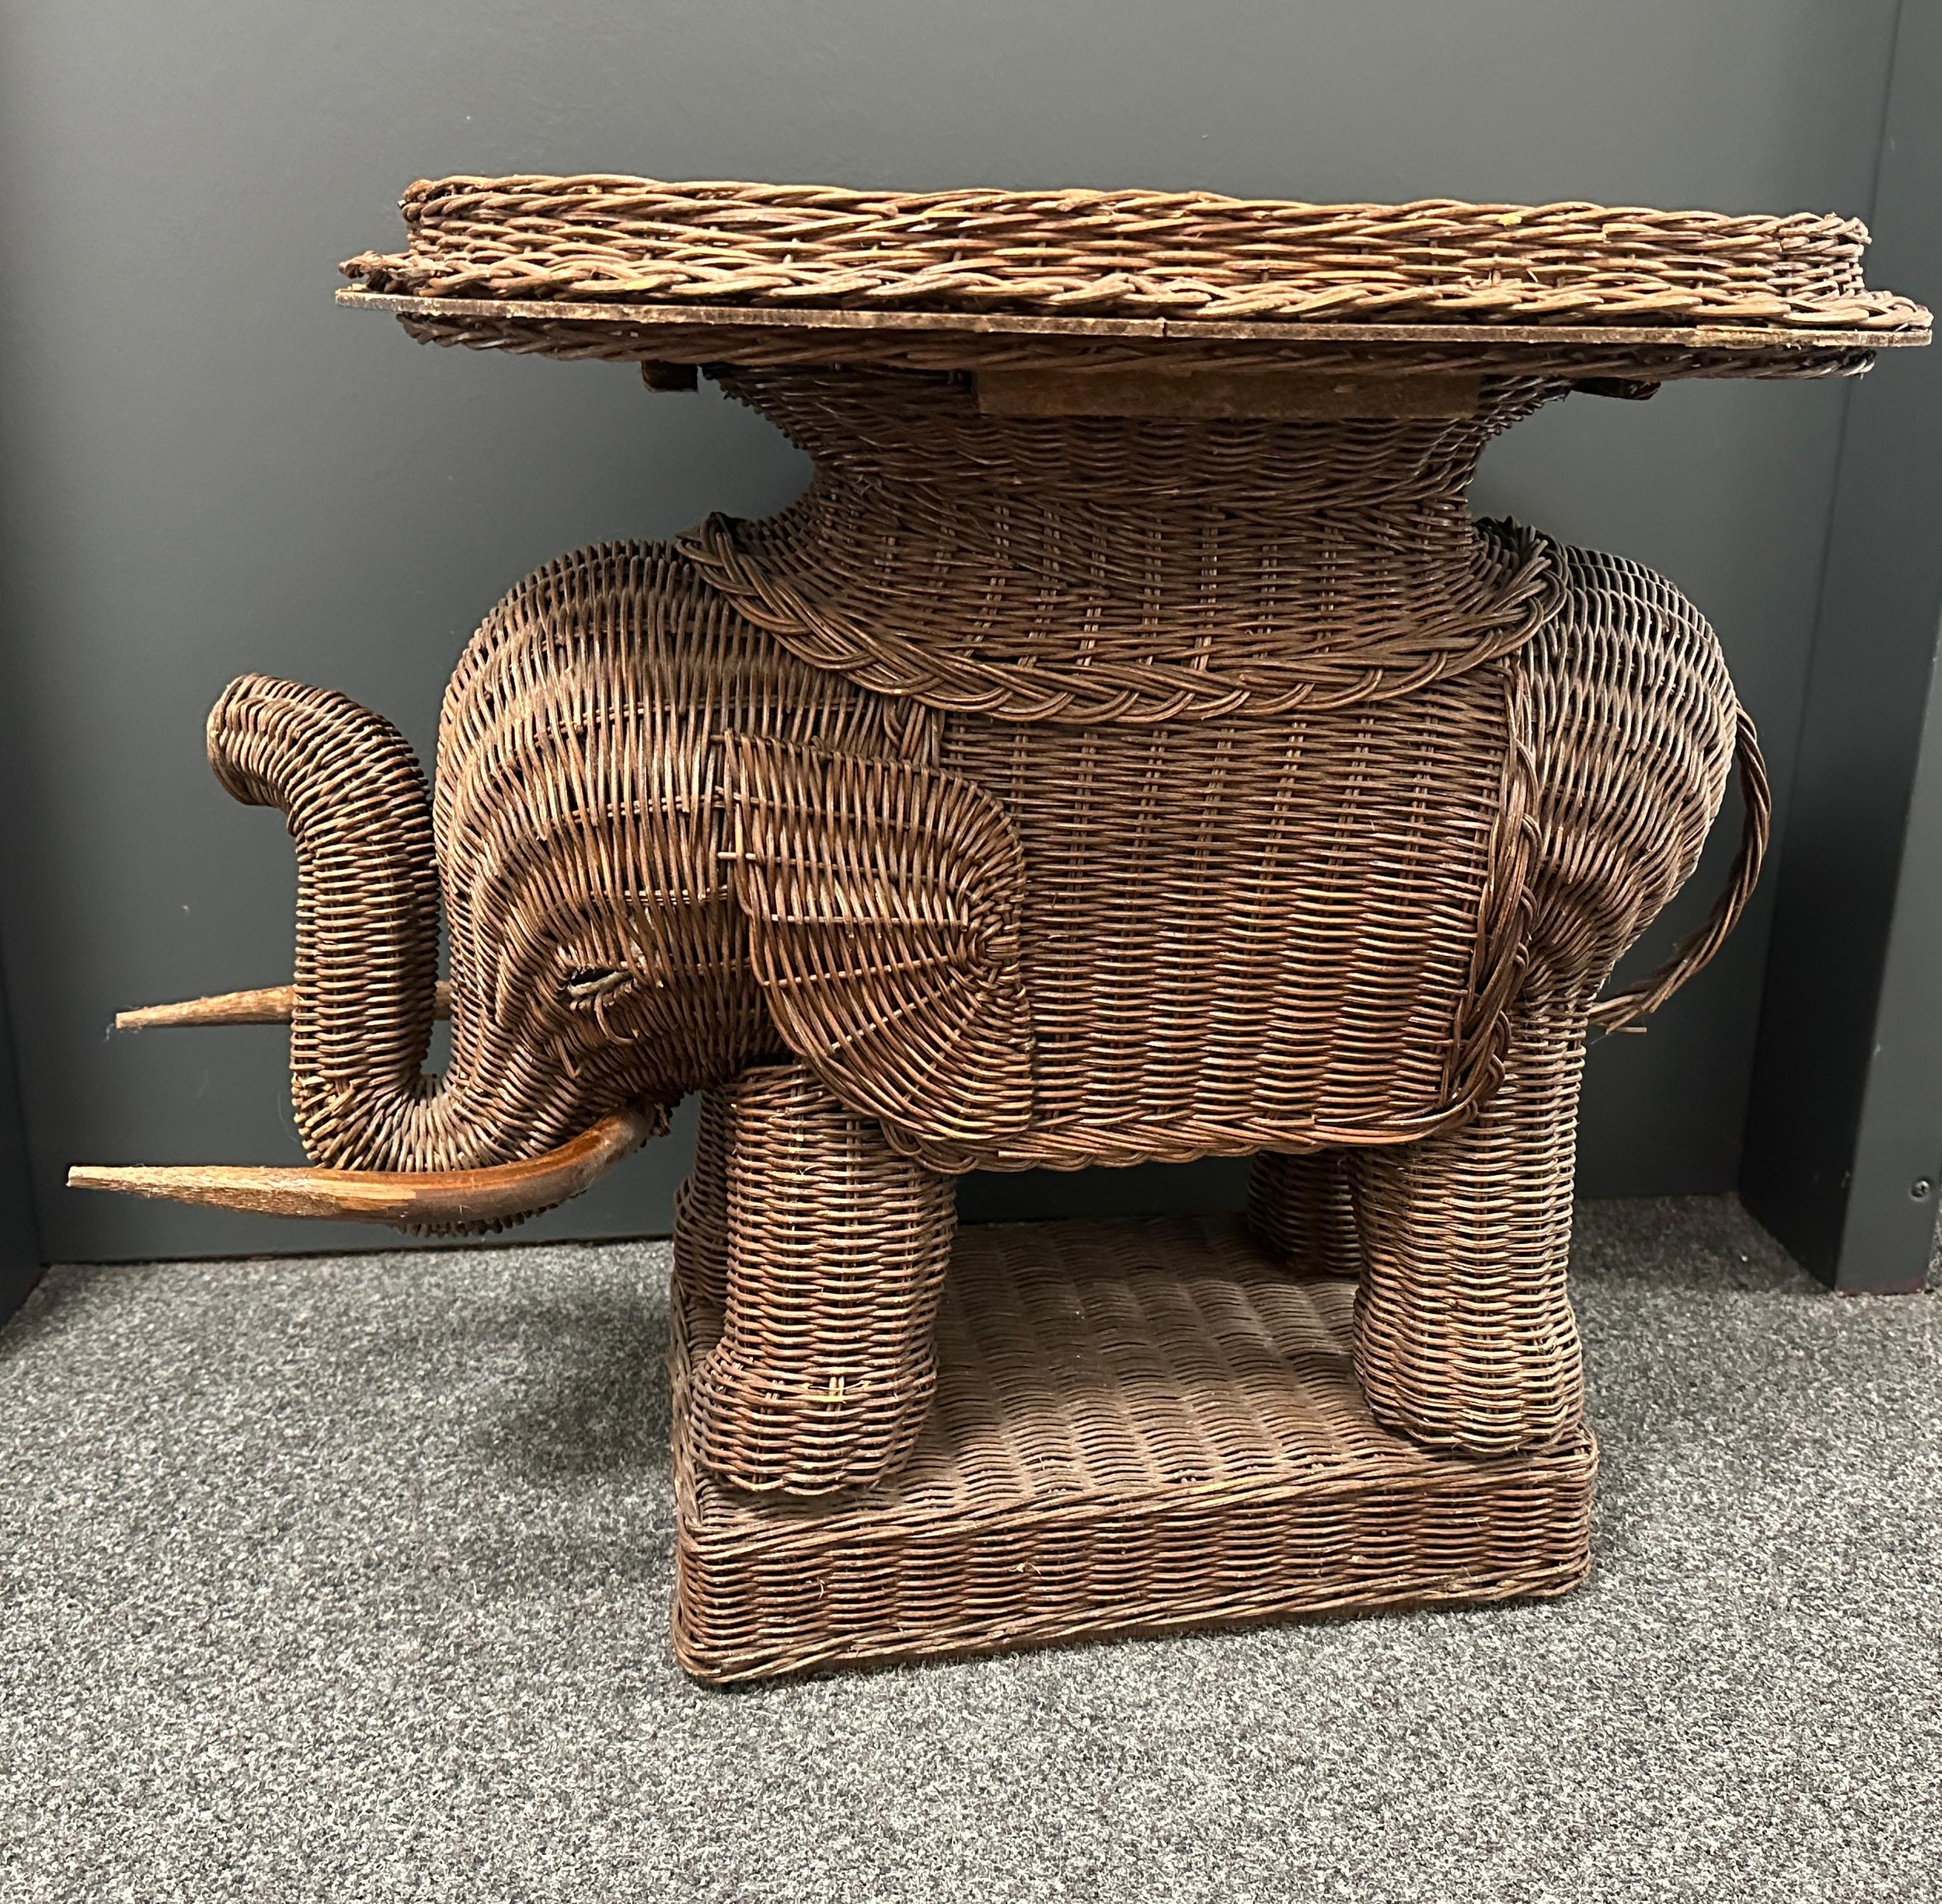 Stunning Rattan Wicker Elephant Side Table with Tray, France, 1960s For Sale 8